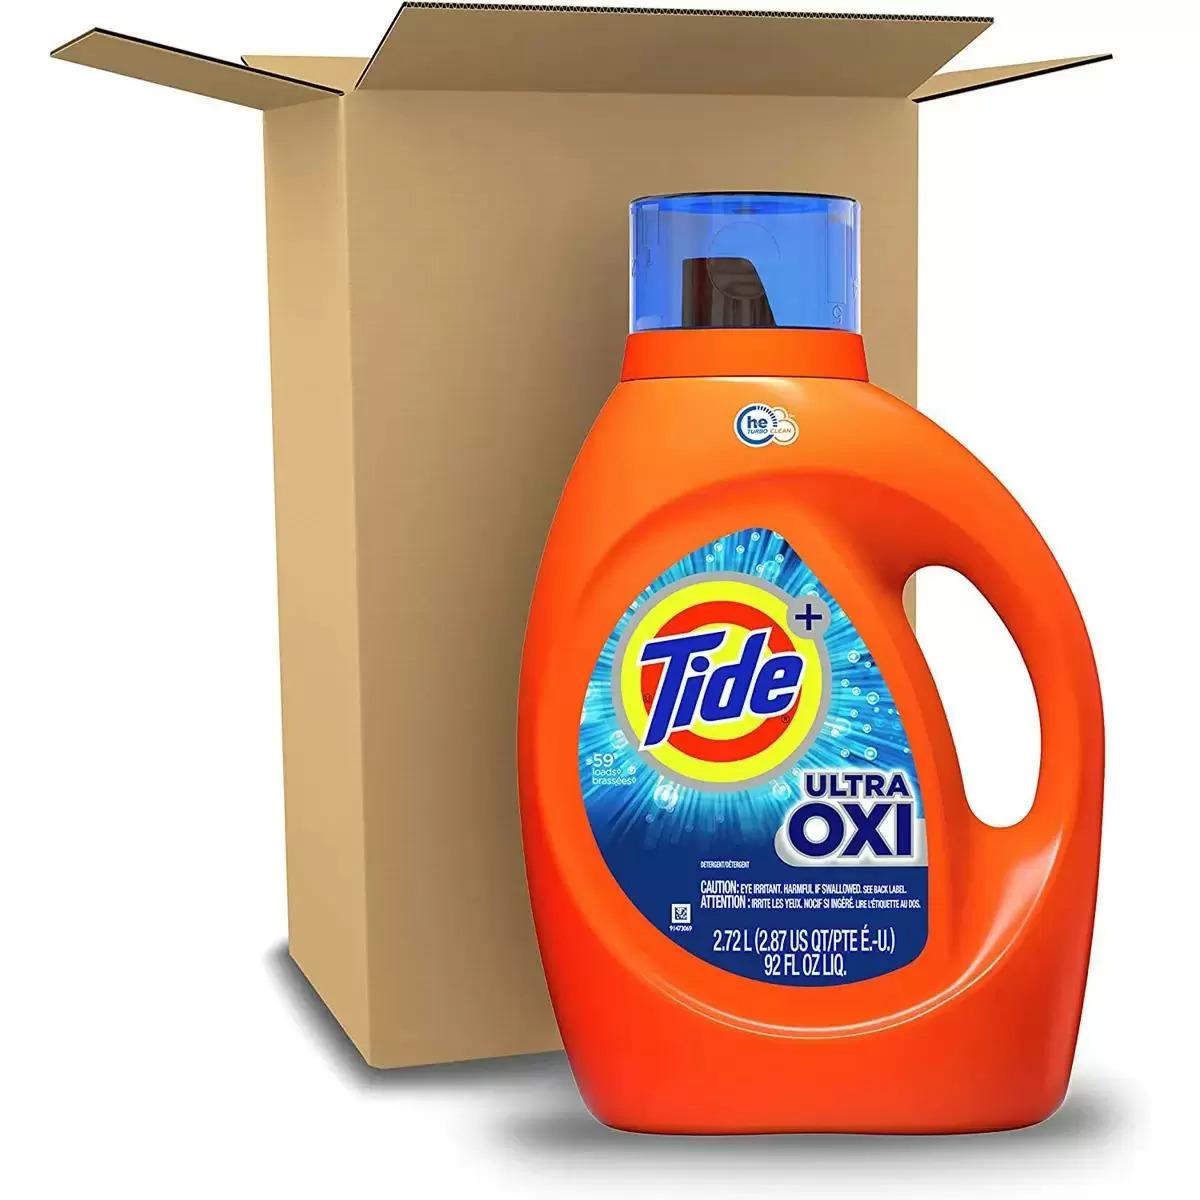 Tide Ultra Oxi Laundry Detergent Liquid Soap for $8.84 Shipped